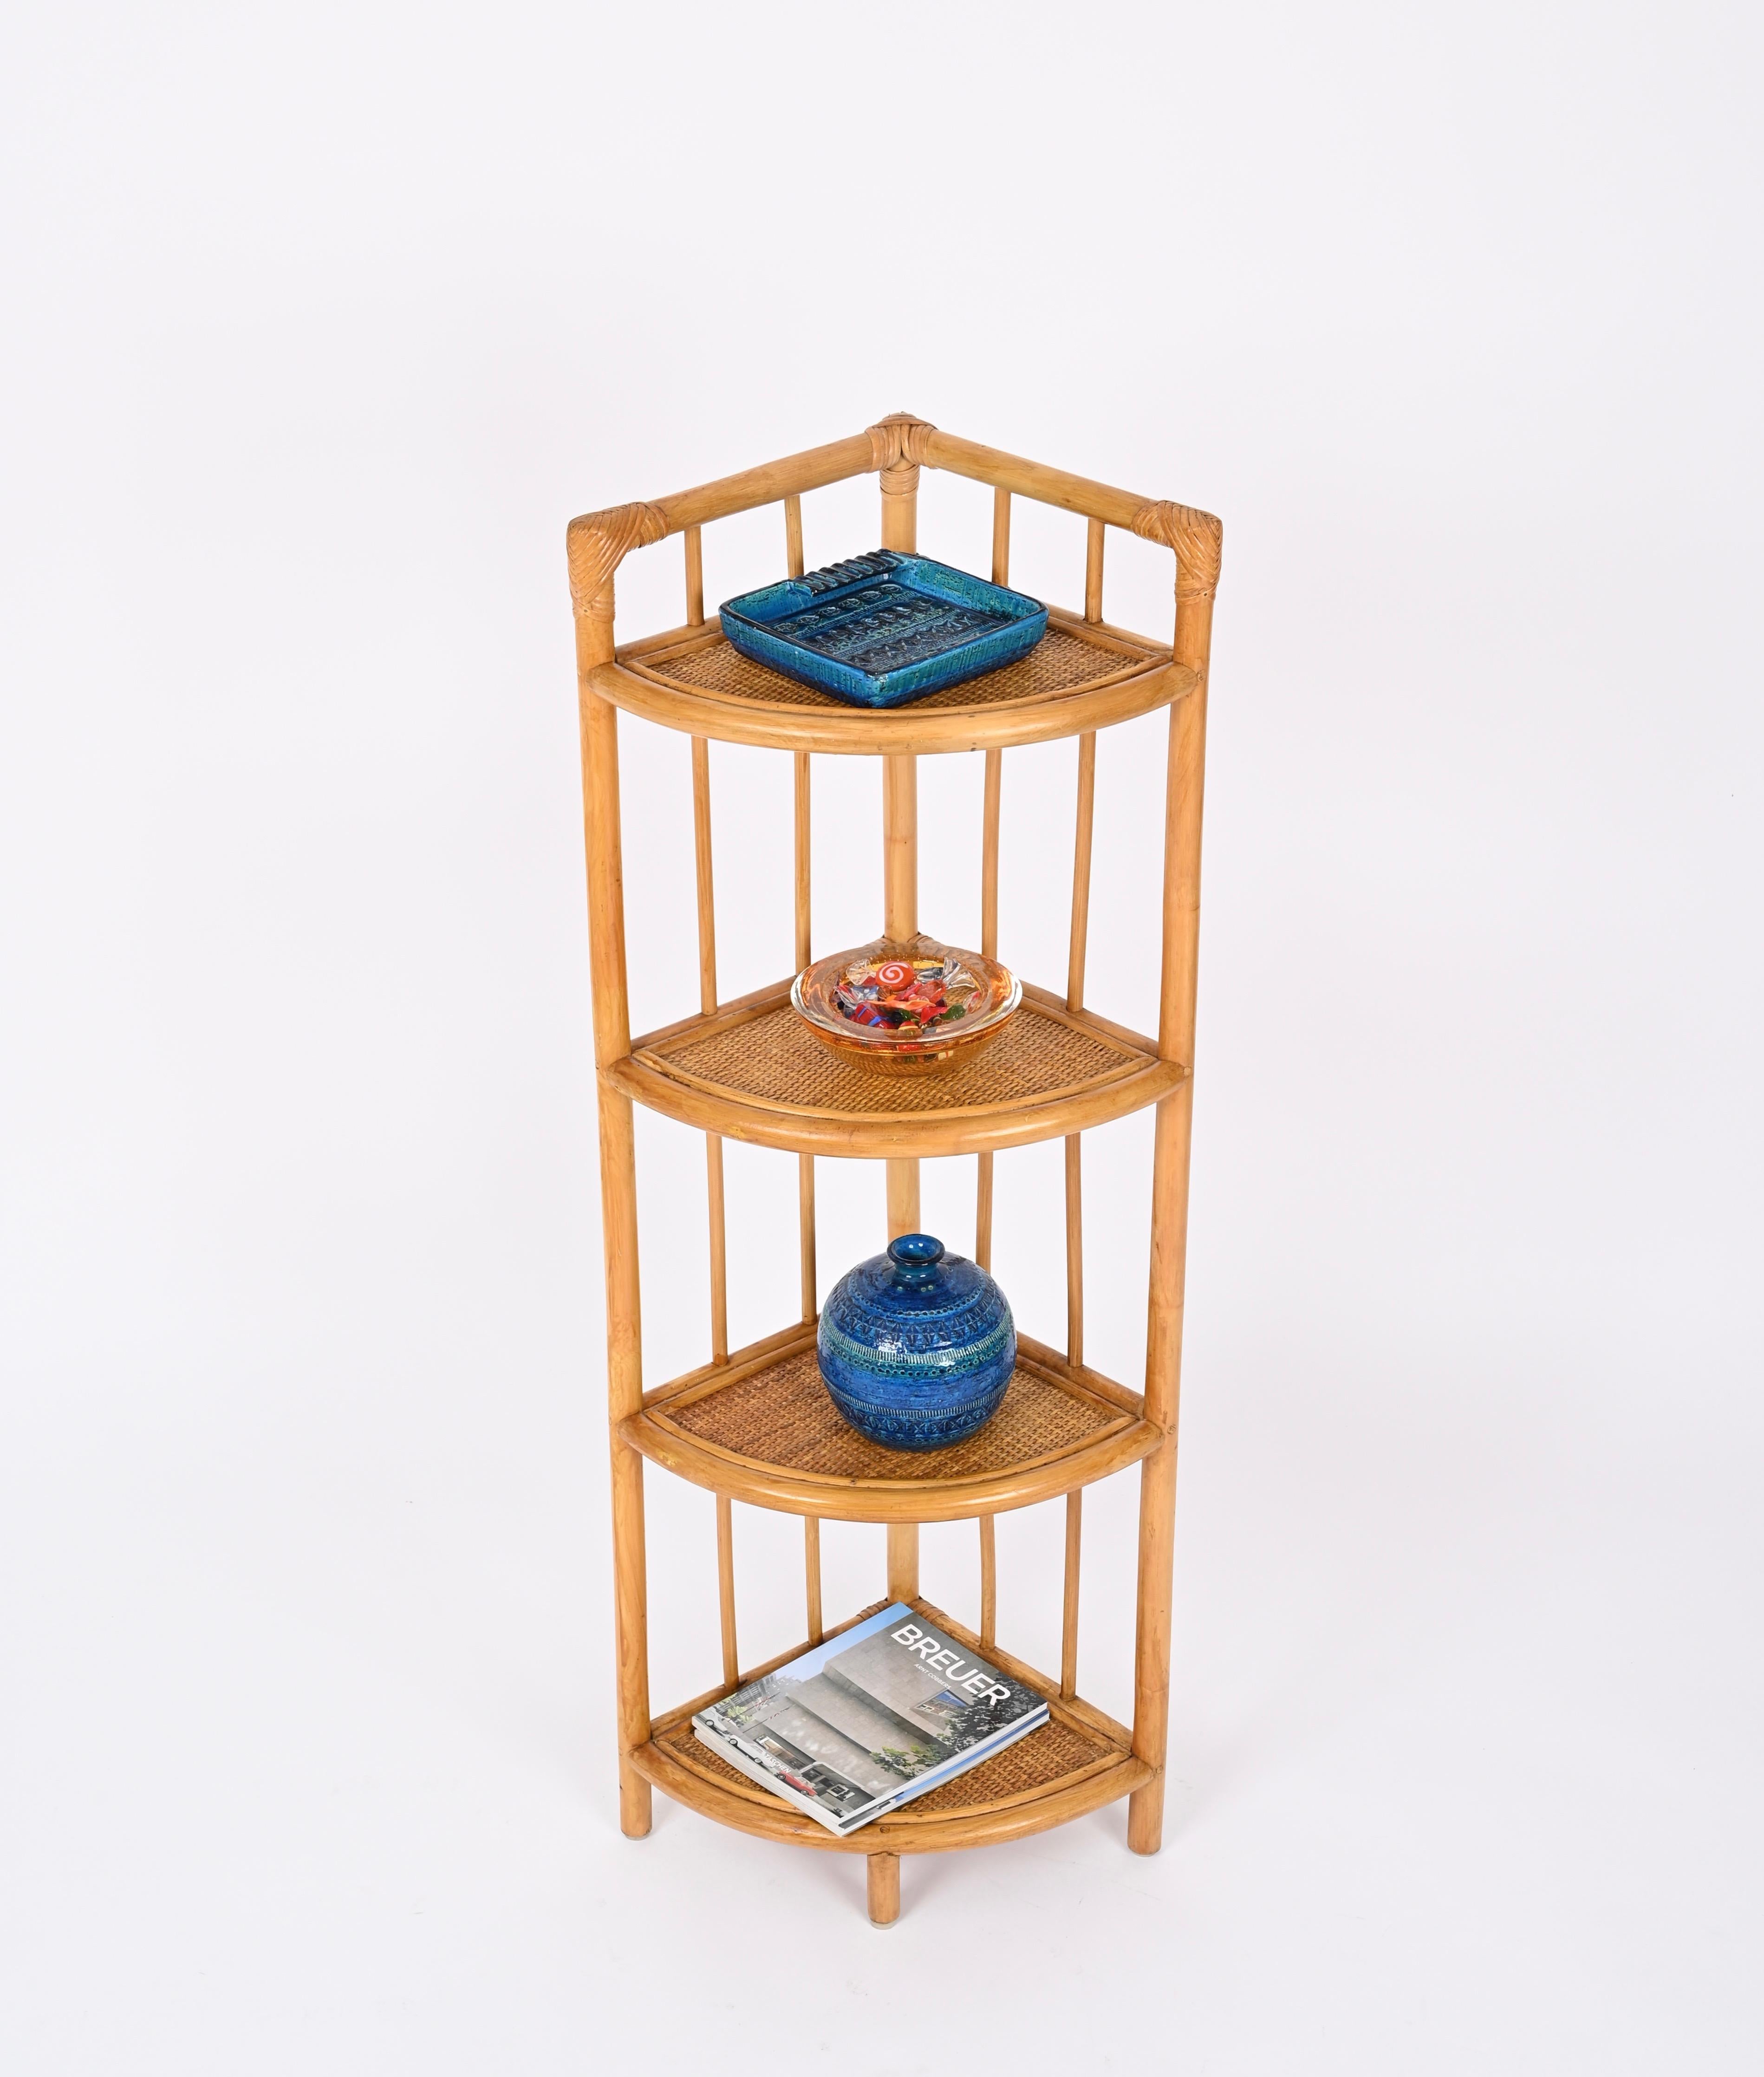 Beautiful mid-century triangular corner bookshelf made in bamboo, rattan and wicker. This lovely French Riviera style bookshelf was produced in Italy during the 1970s. 

This charming bookshelf features four triangular shelves made in curved bamboo